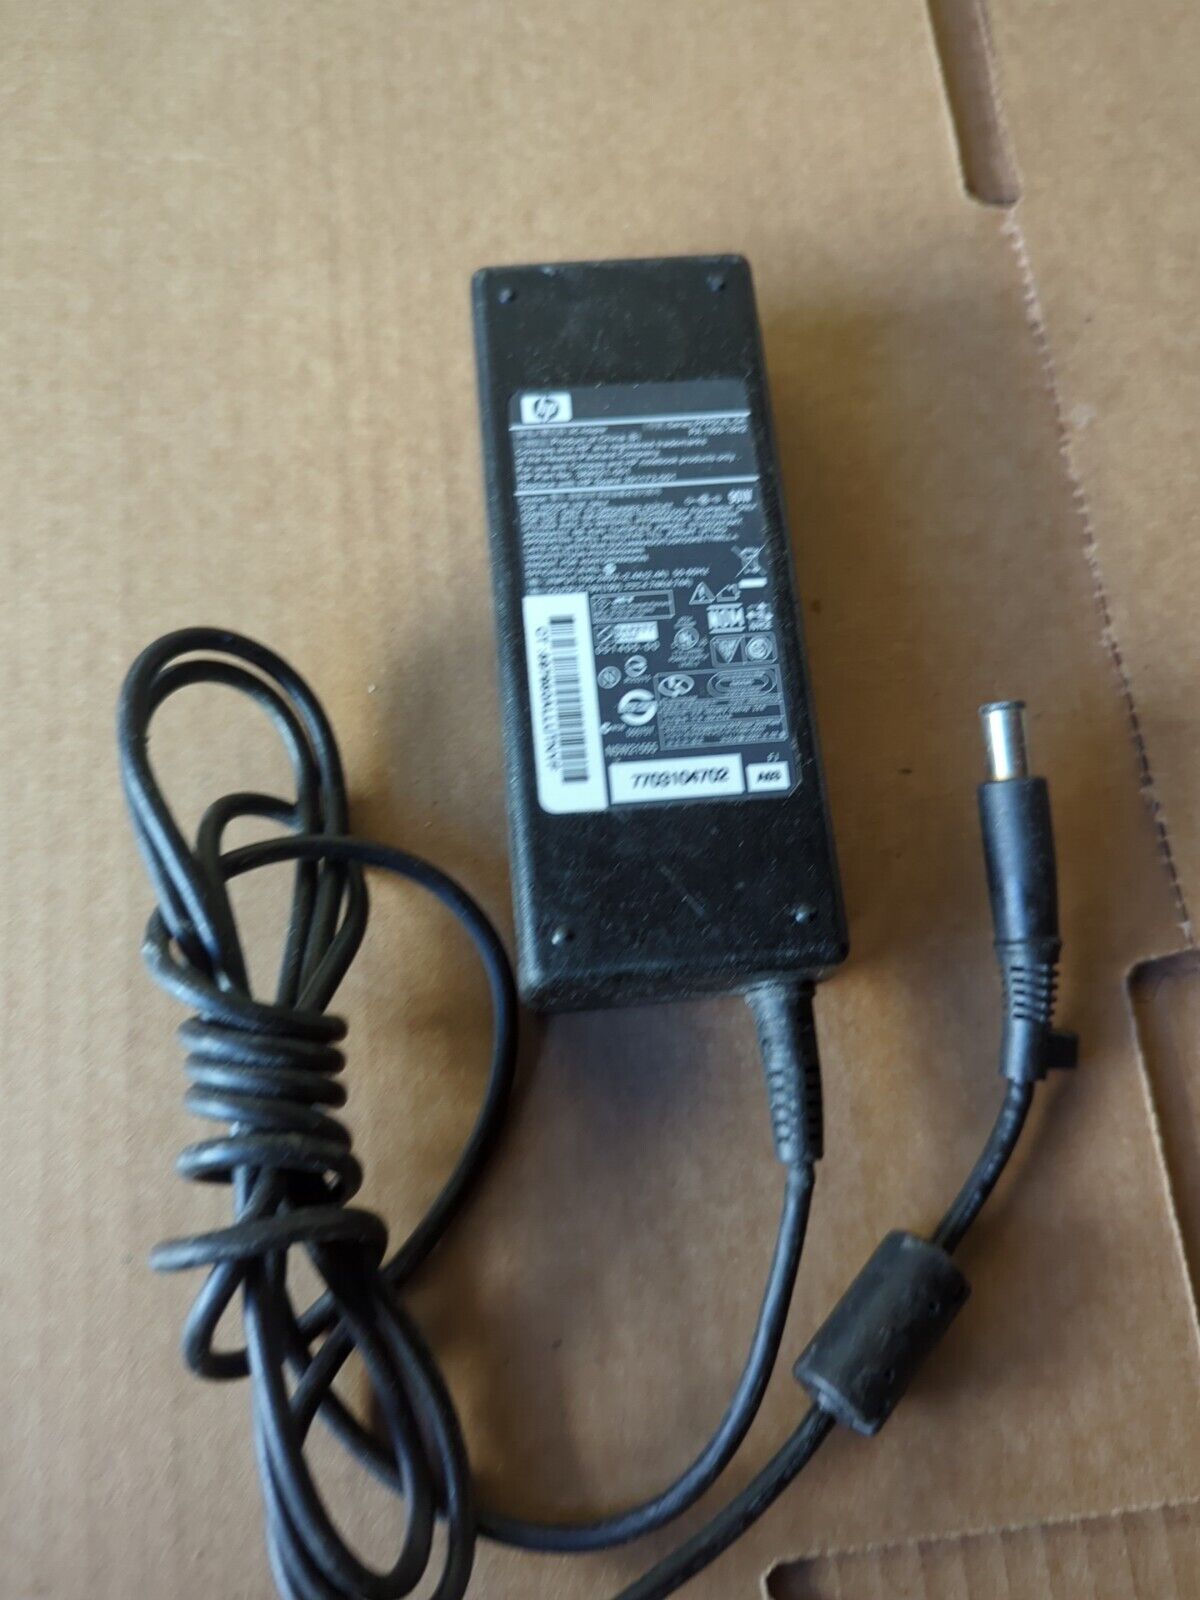 HP PPP014L-S AC Power Adapter DC 19V Charger For HP Notebook & Compaq 393955-001